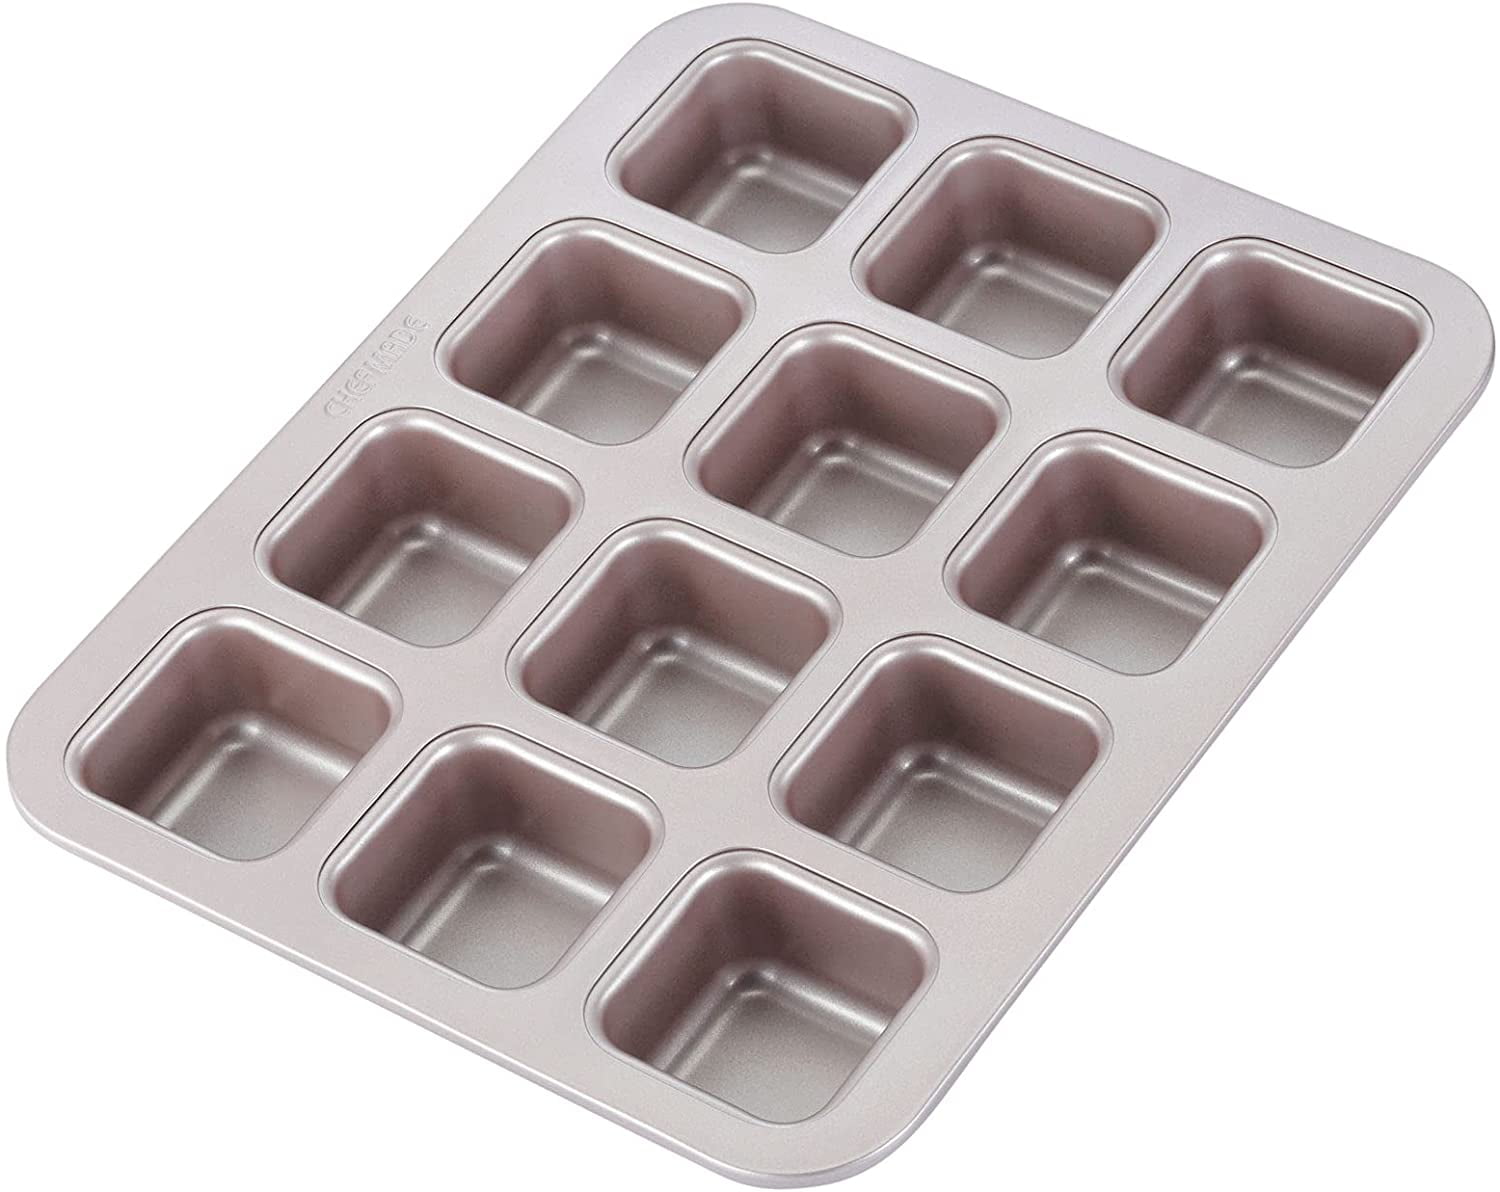 CHEFMADE Brownie Cake Pan, 12-Cavity Non-Stick Square Muffin Pan Blondie Bakeware for Oven Baking (Champagne Gold)